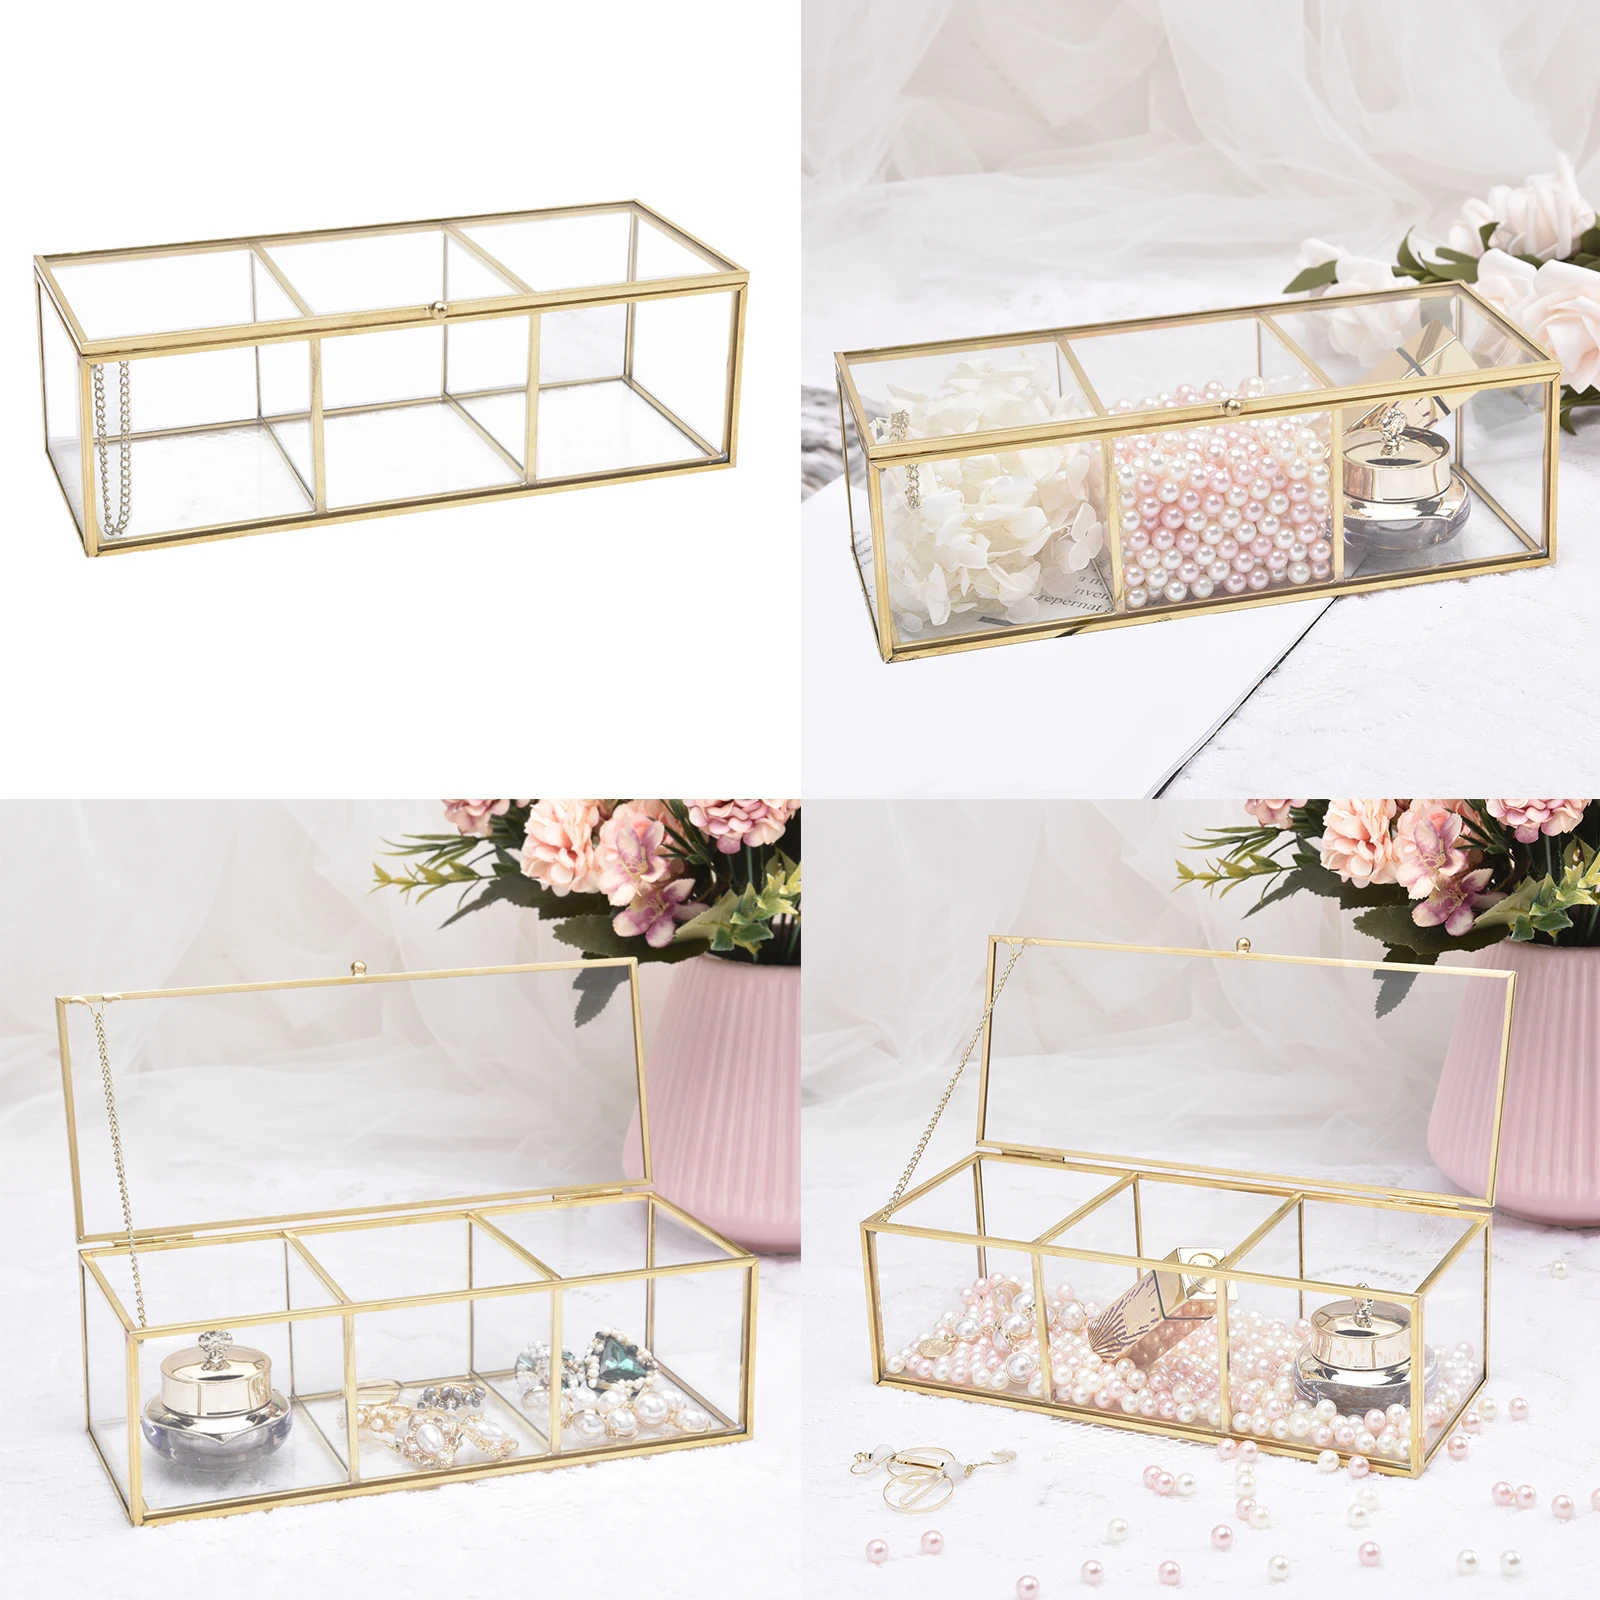 Clear Glass Makeup Organizer Tray, 3 Spaces Cosmetic Display Case Storage Box for Lipstick,Makeup Brushes and Skin Care Bottles